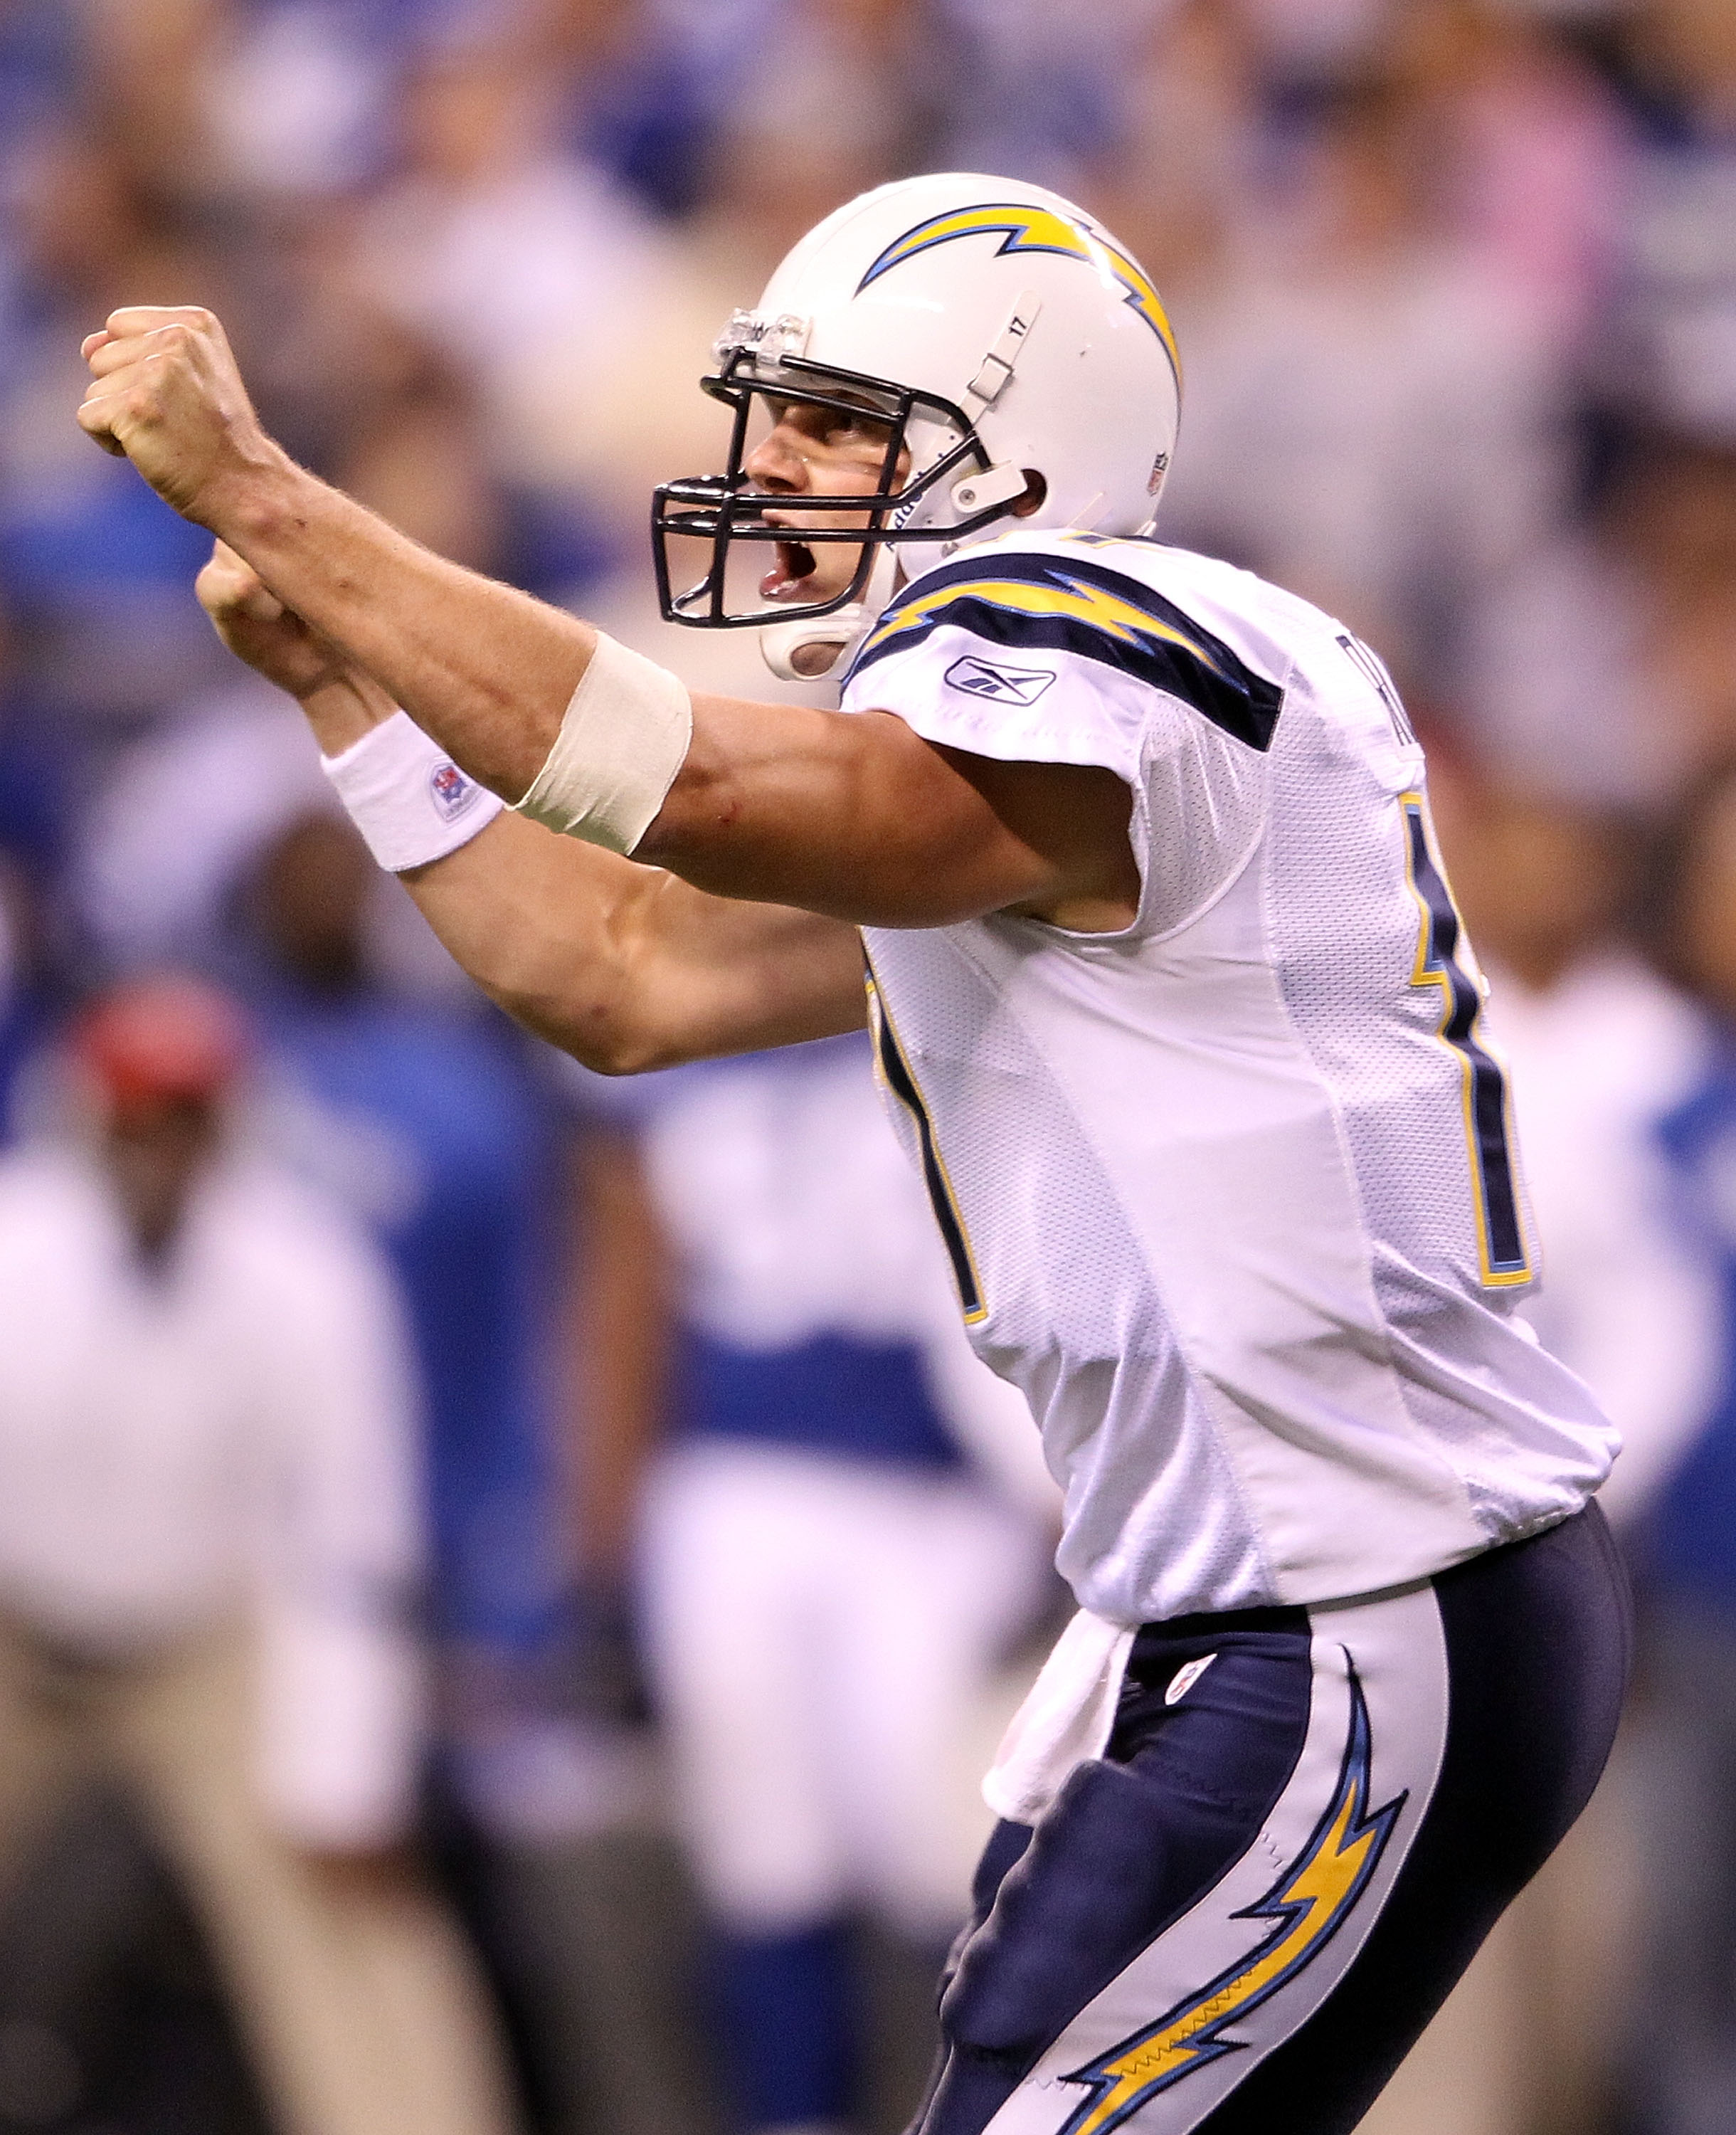 Phillip Rivers is the biggest douchebag ever